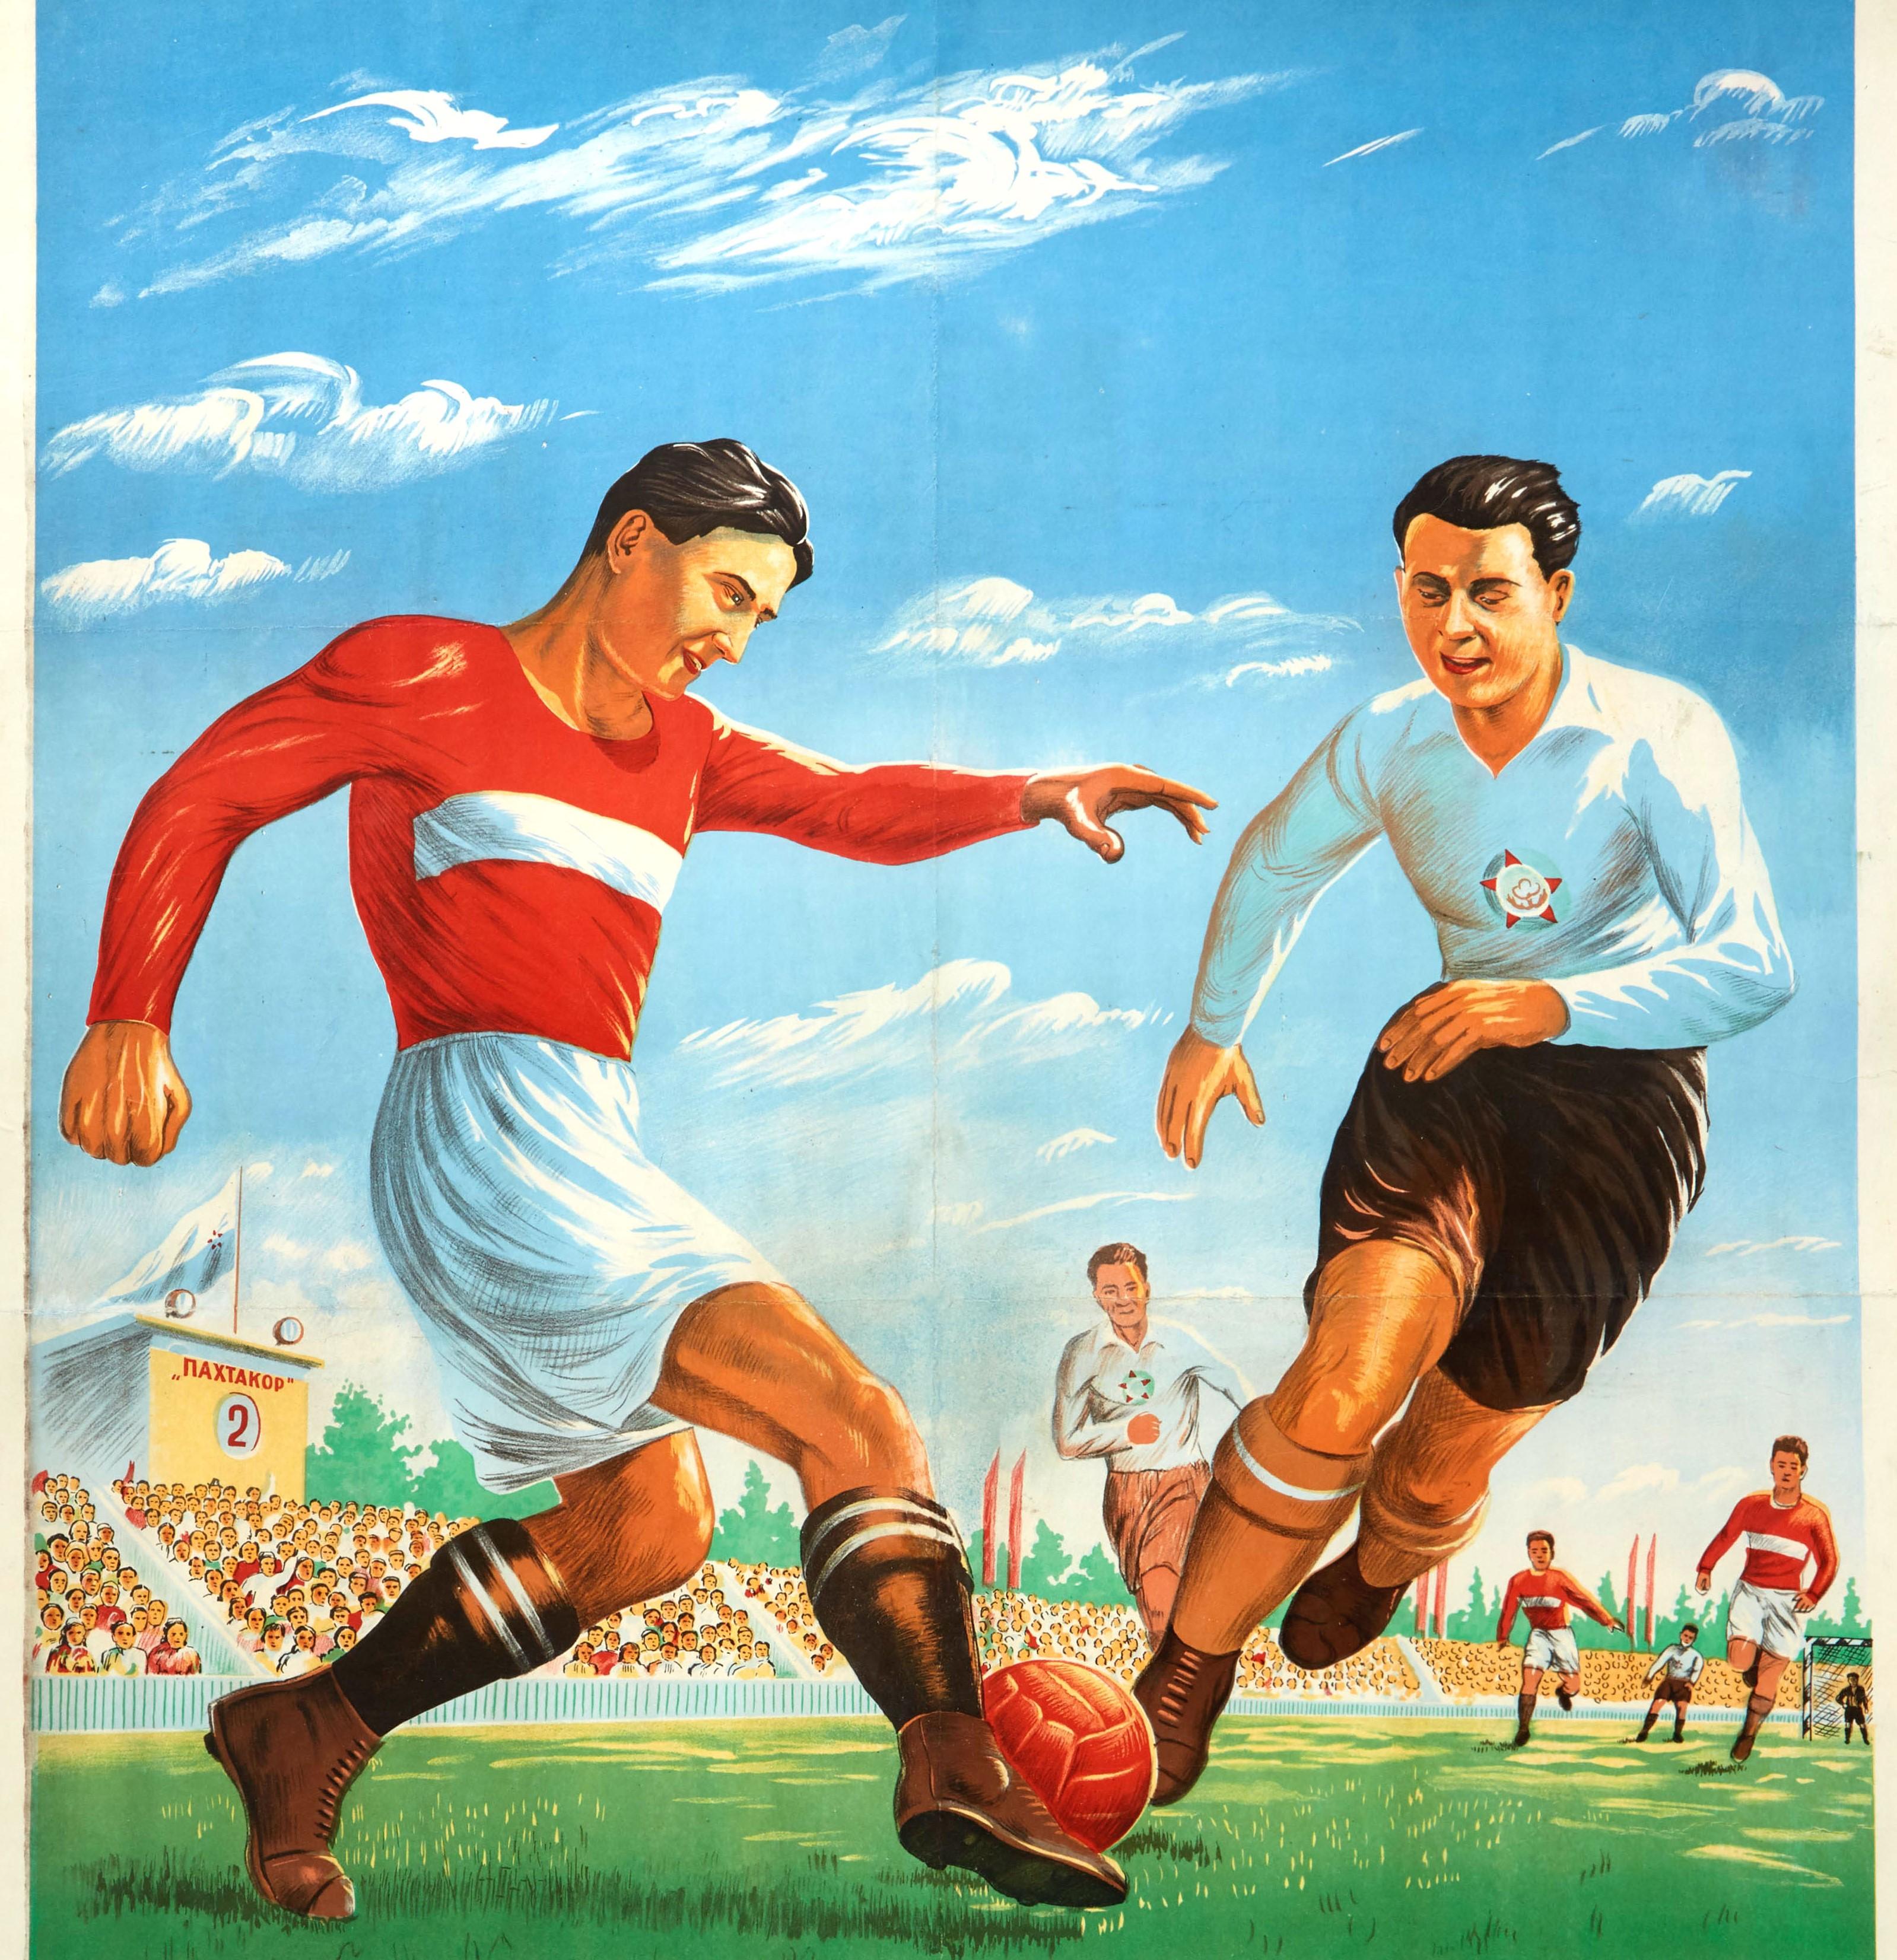 Original vintage sport poster - Football is the Nation's Favourite Game - featuring a dynamic illustration of two football players in red and blue jerseys kicking the ball on a green grass football pitch with the goalkeeper in the distance and